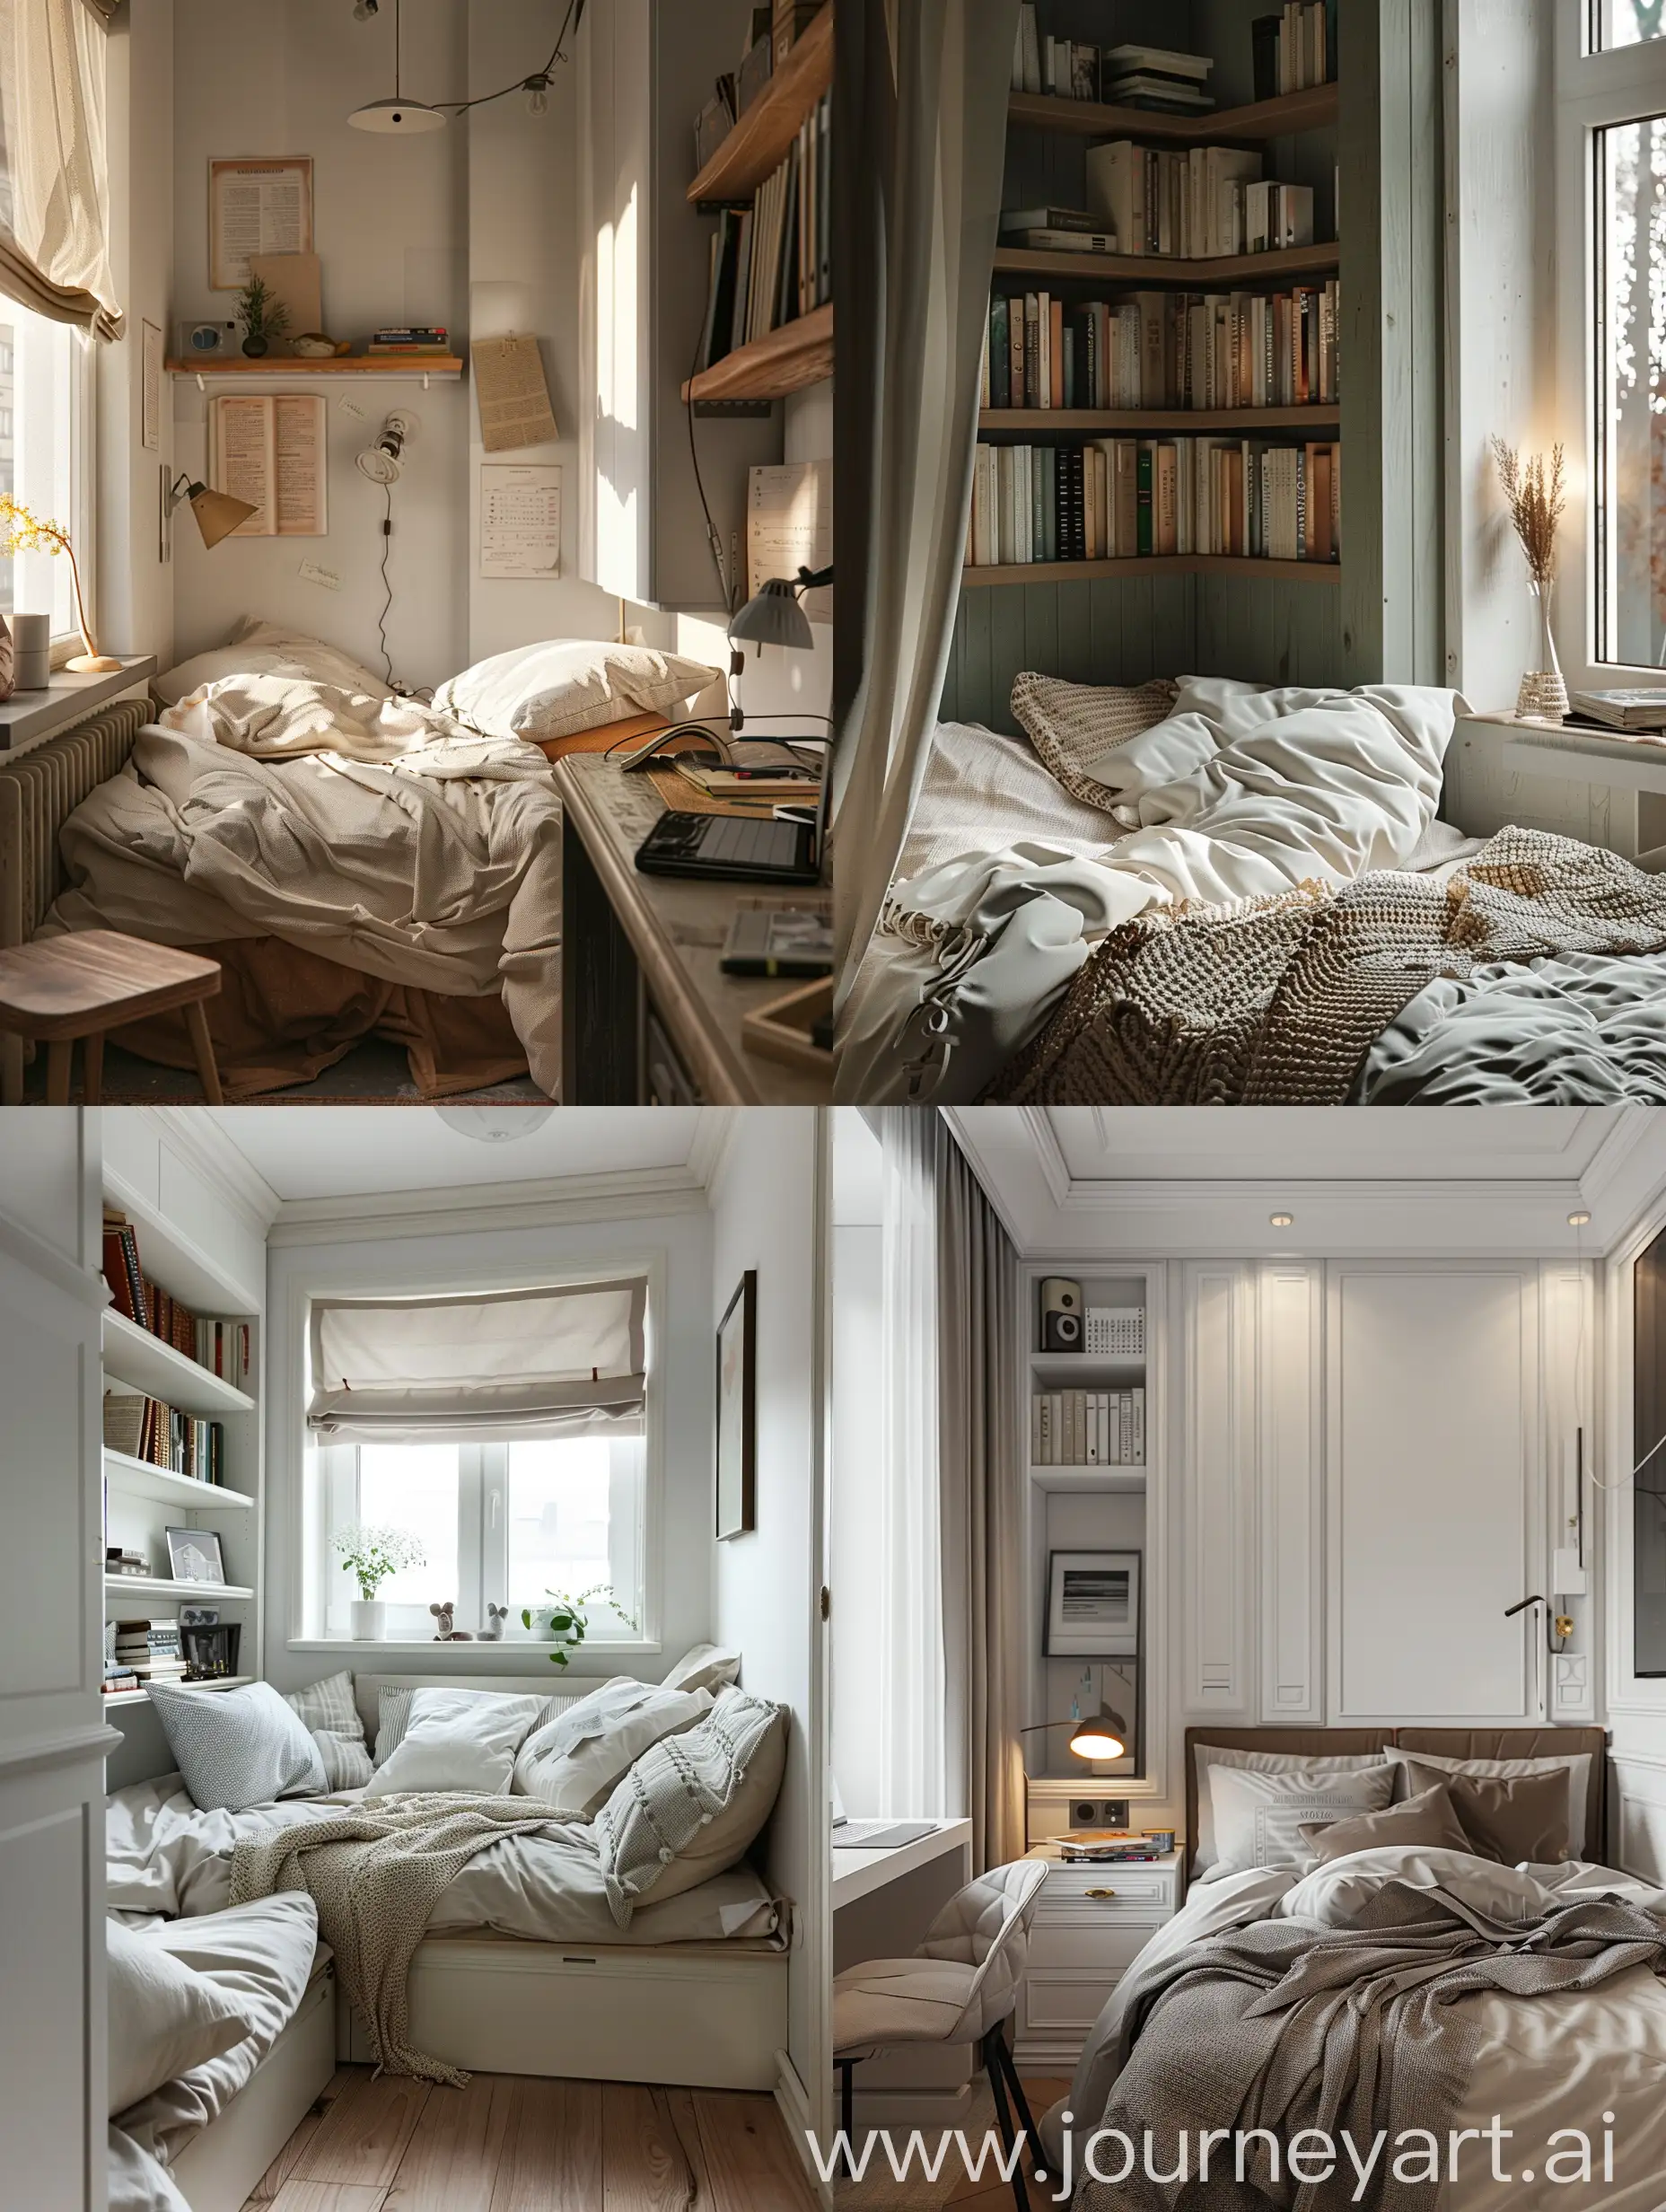 Cozy-Bedroom-Interior-for-Studying-with-White-Walls